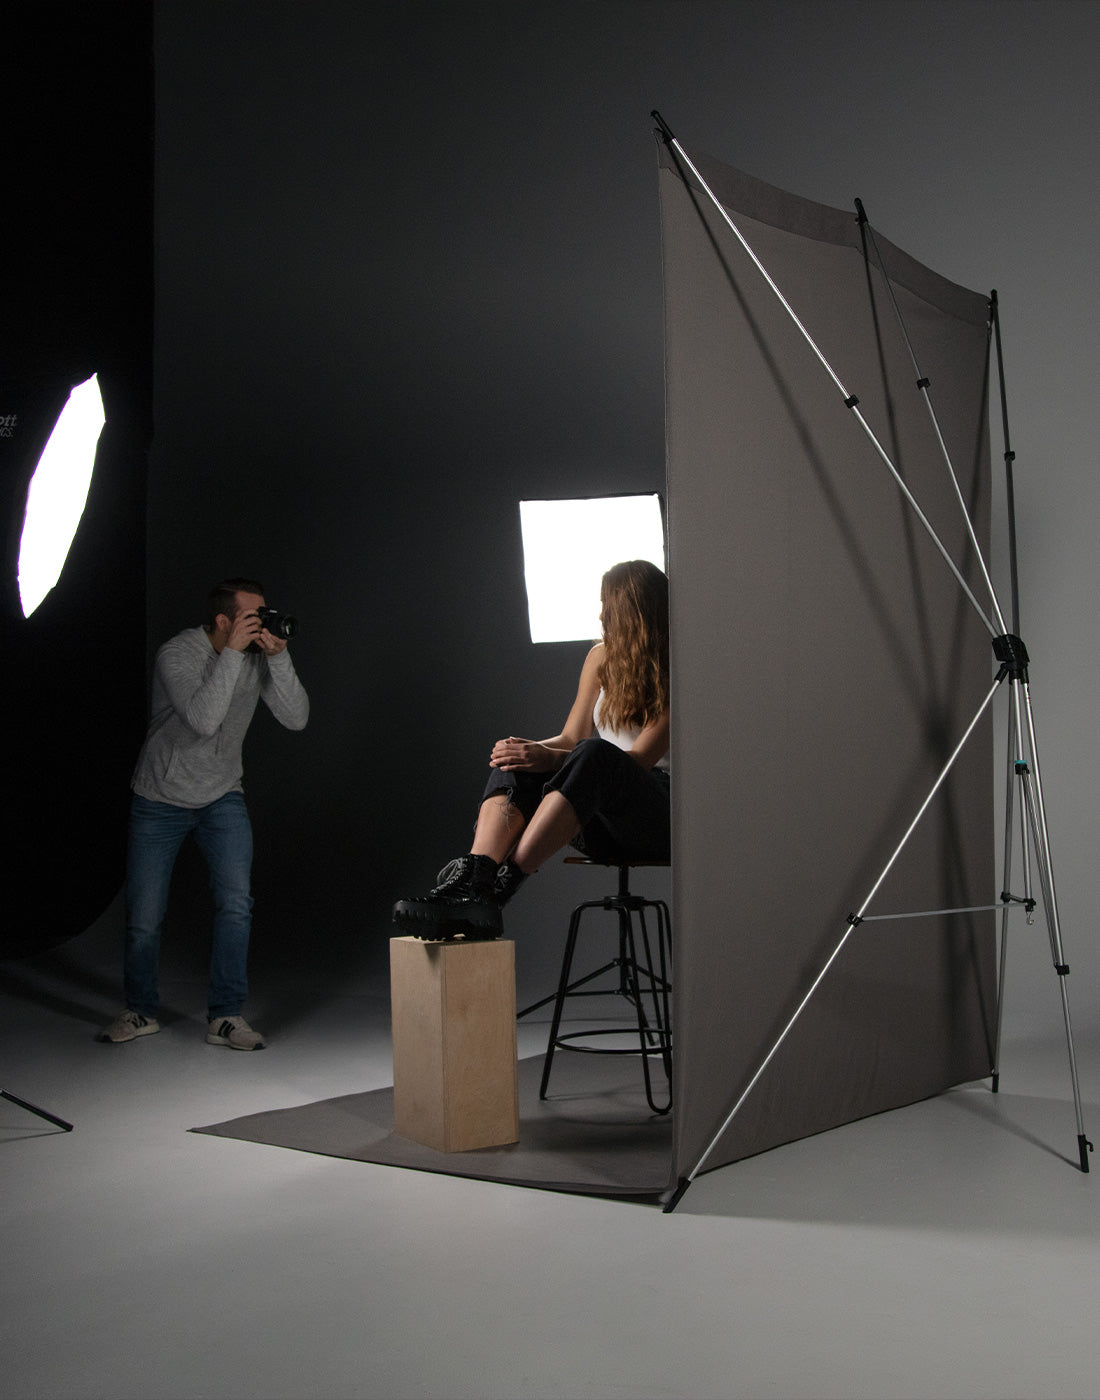 in-studio full-length portrait on chair using gray x-drop sweep backdrop and ulite